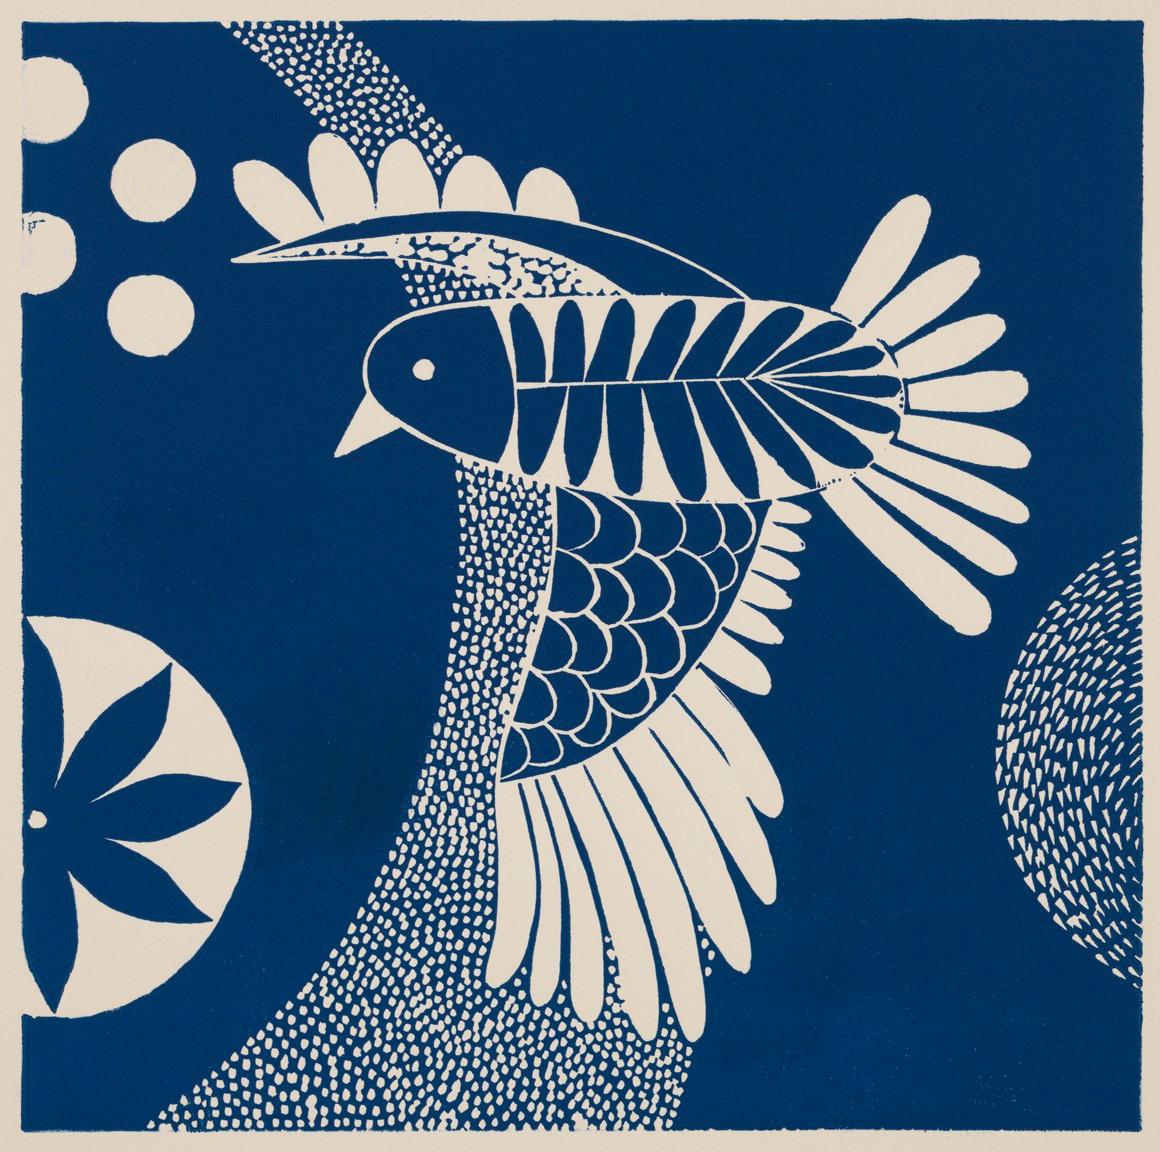 'Chittering and Chattering V'  Linoleum Block Print,  Edition 10,  11 5/8 x 11 5/8 Inches,  is one of a series of 6 related prints in this size in varying shades of blue.   Sold individually or as sets of 2, 3, 4, 5 or 6.

There is also a series of